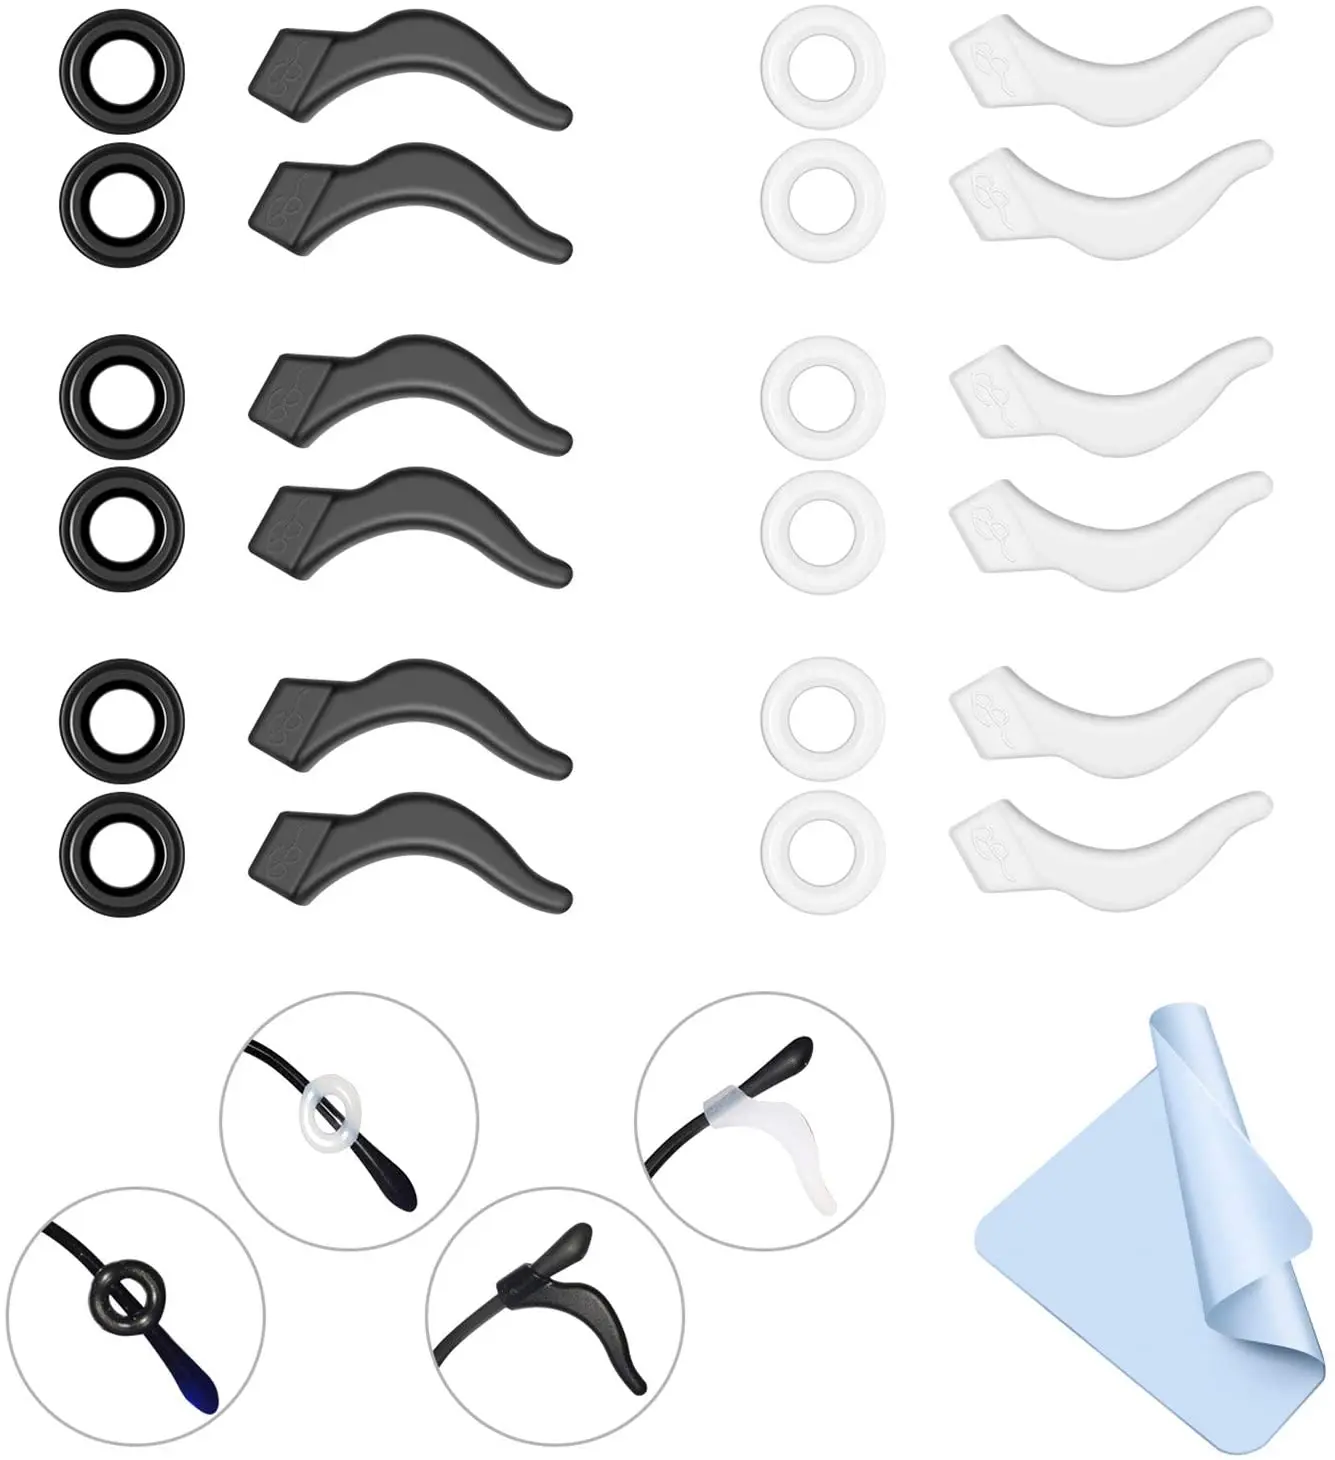 

24pcs Eyeglasses Ear Grips, Anti Slip Eyeglass Retainer, Premium Silicone Ear Hook, Keep Glasses From Slipping Down Accessories